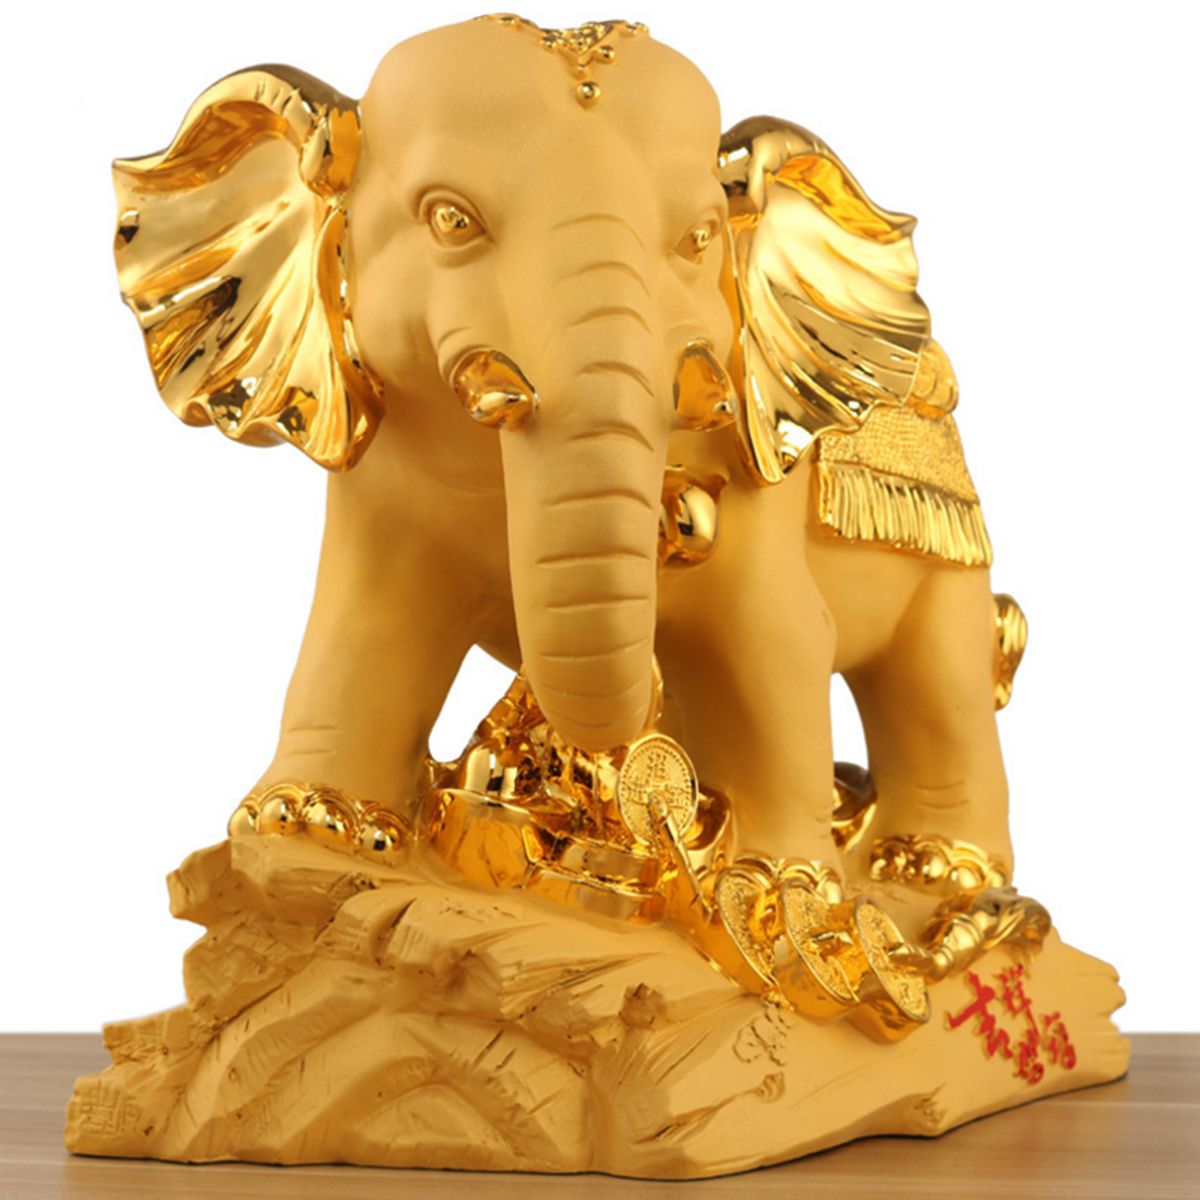 Traditional-Chinese-Resin-Mascot-Lucky-Wealthy-Elephant-Statue-Sculpture-Living-Room-Decorations-1287080